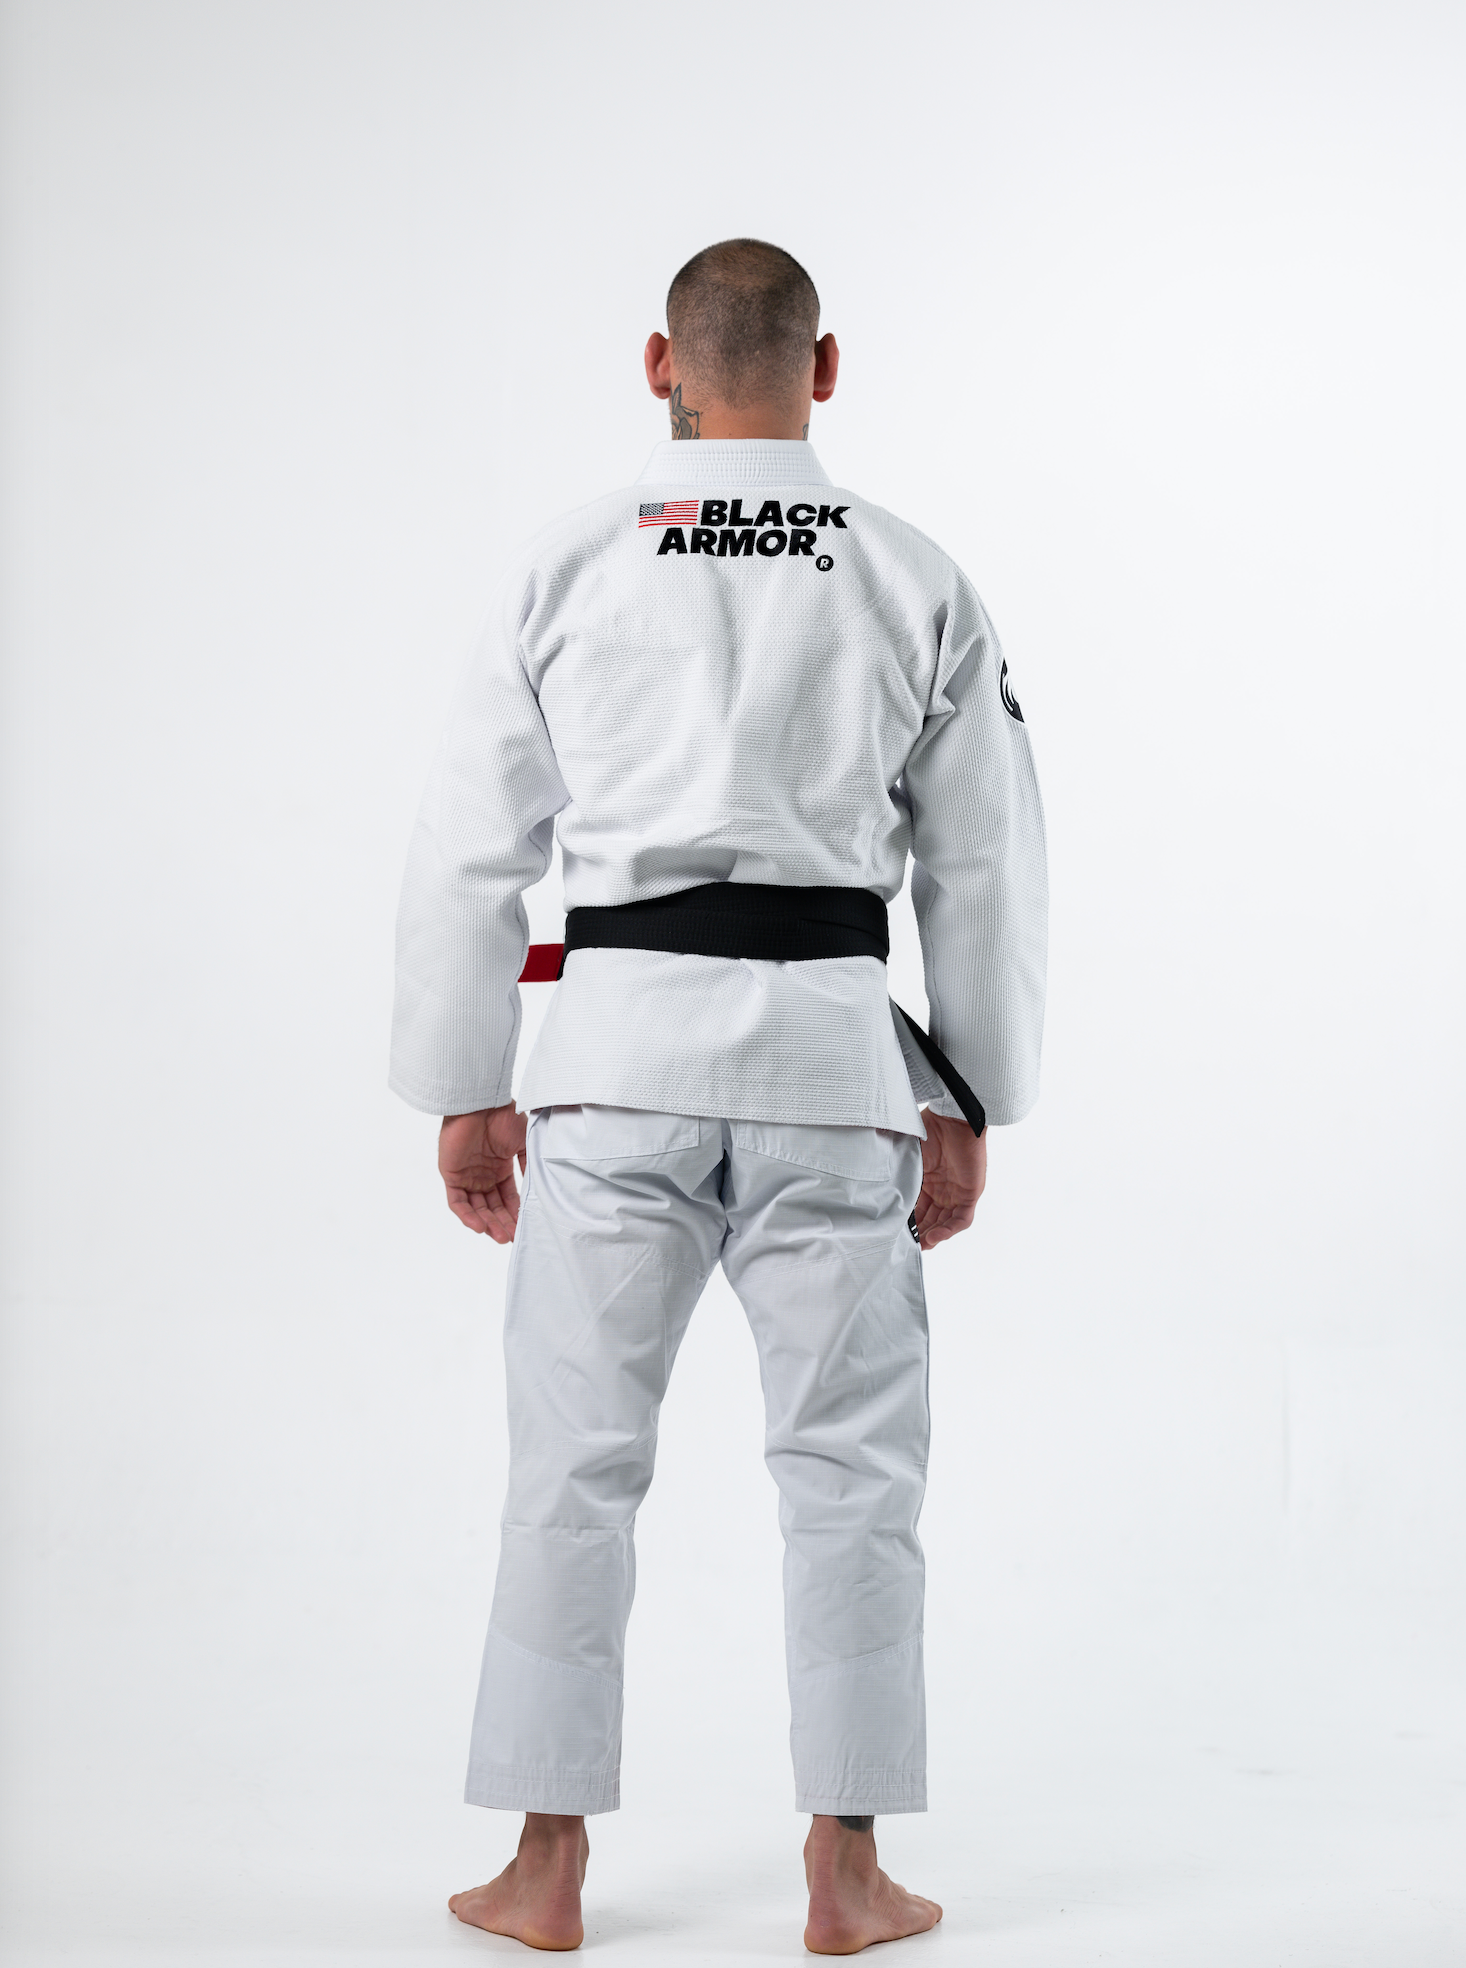 Competition Gi 400g